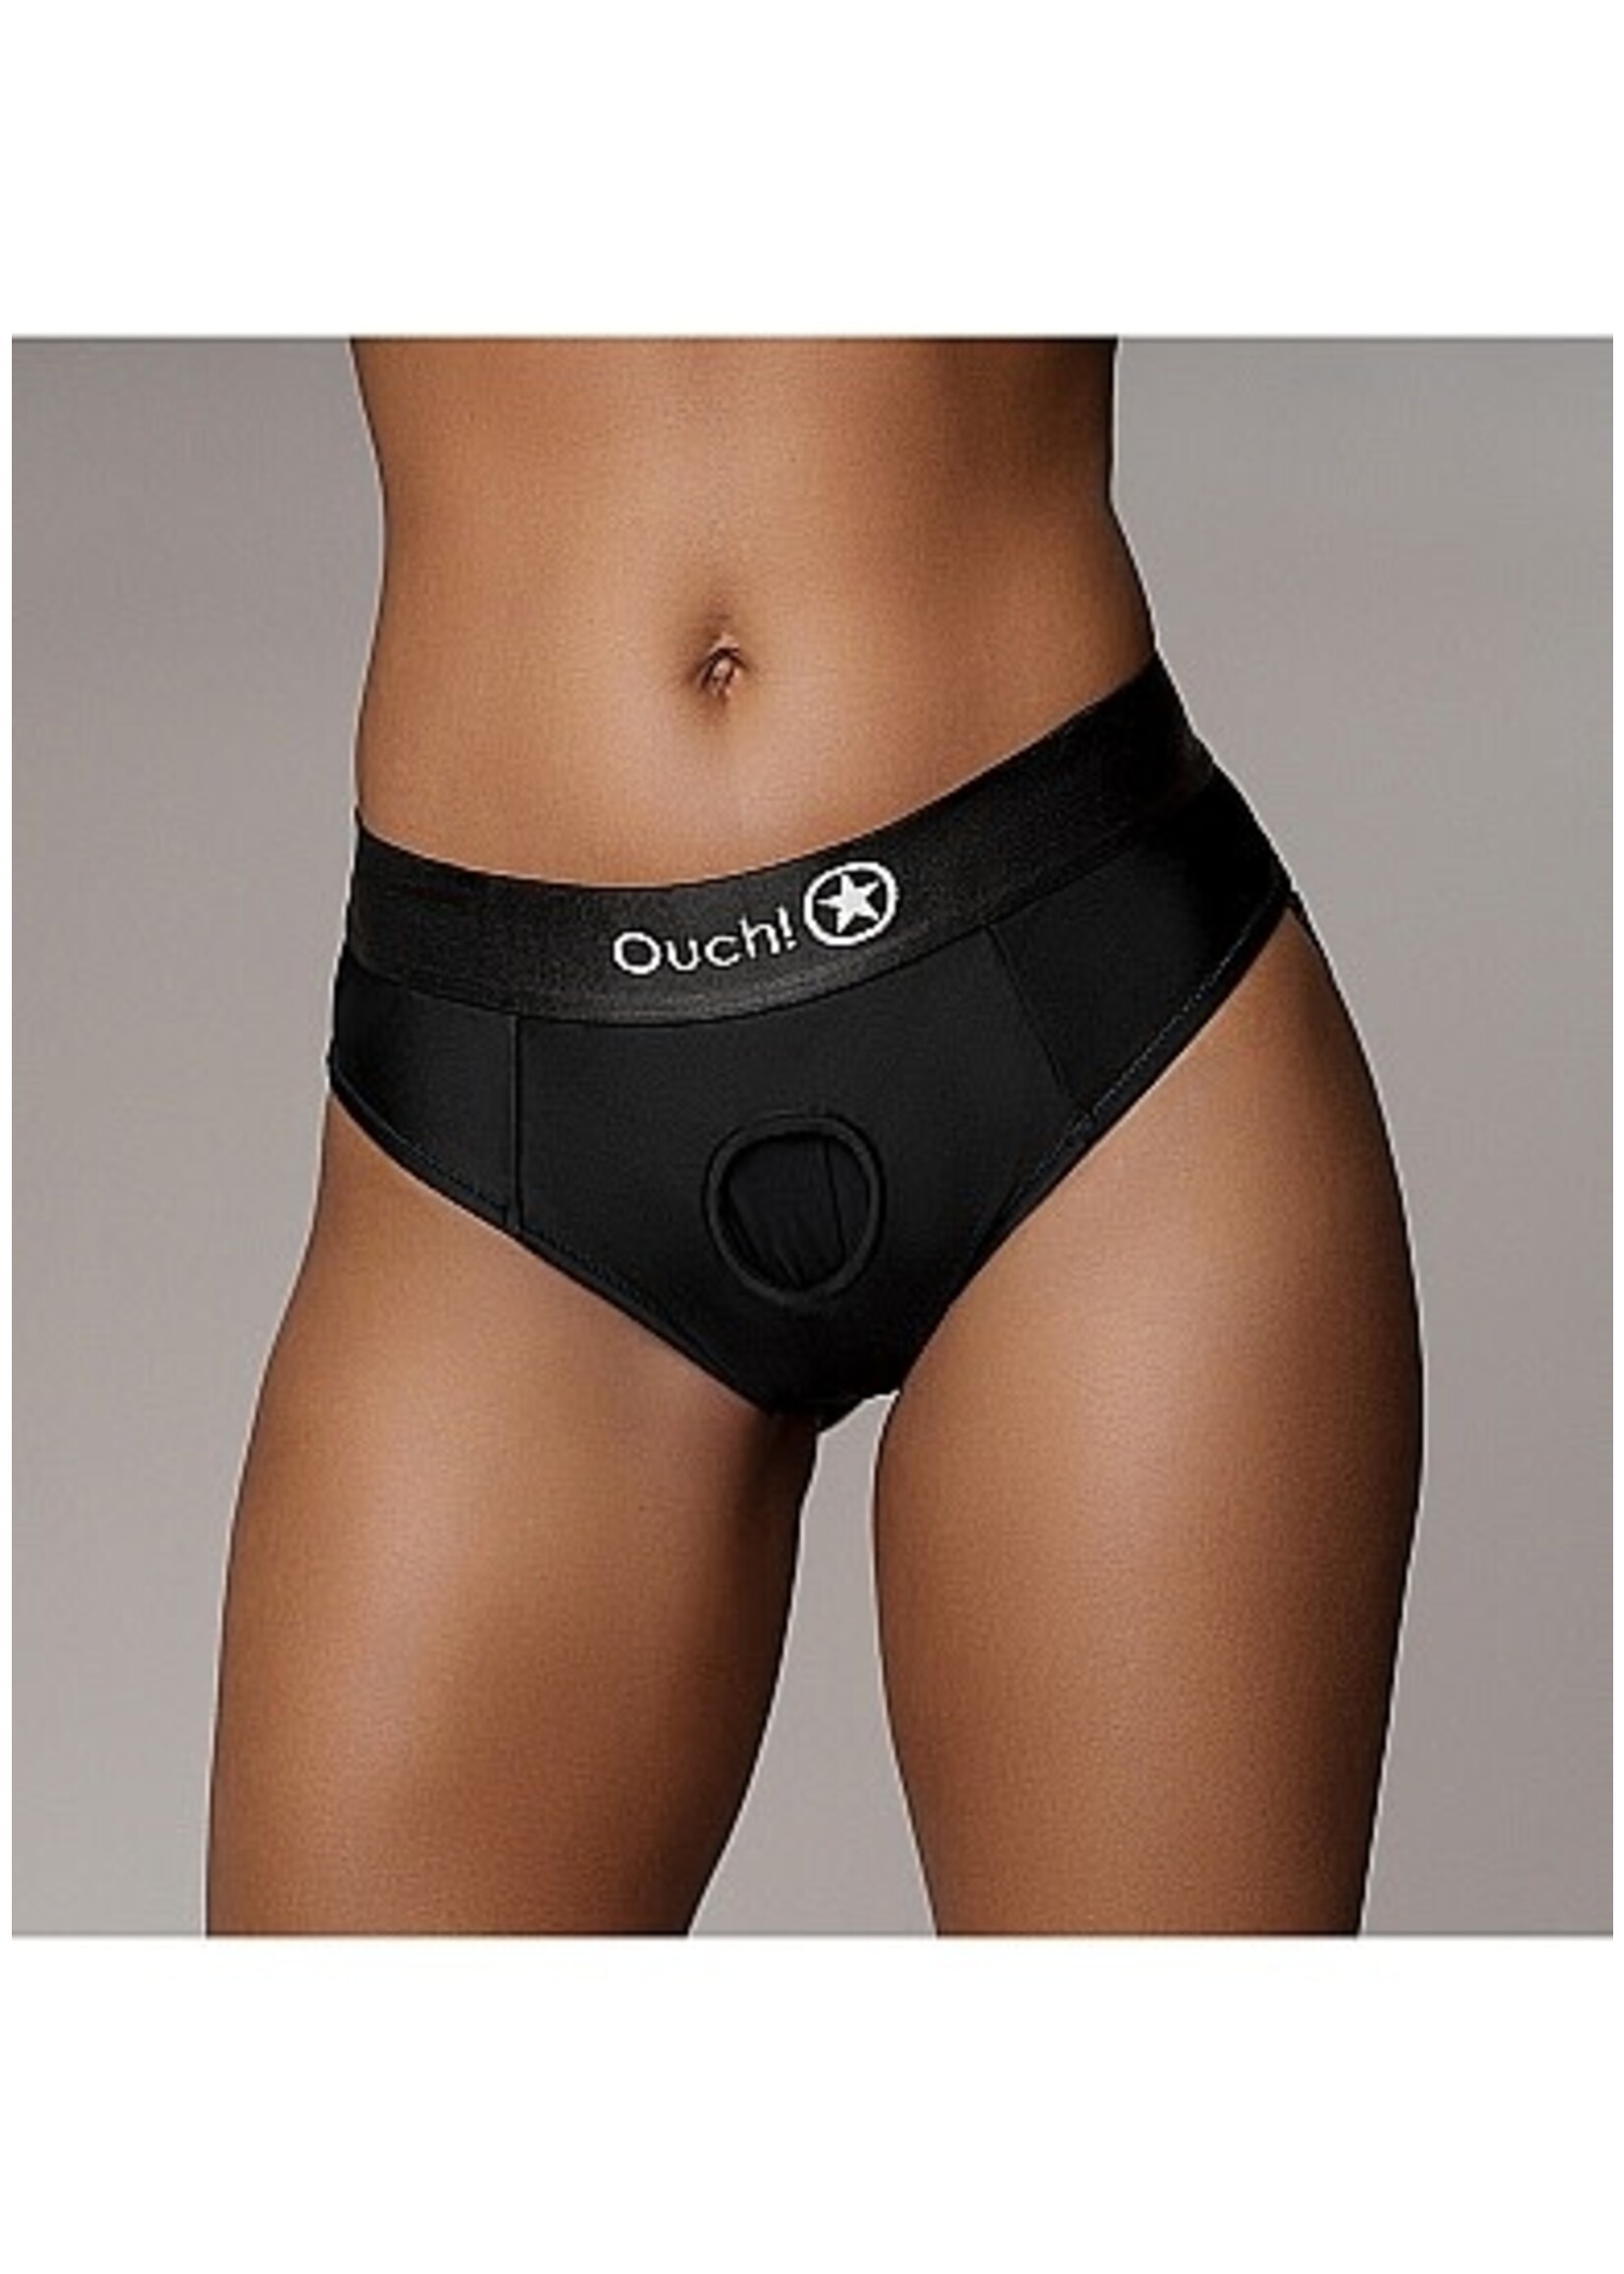 Ouch! Vibrating strap-on thong black M/L